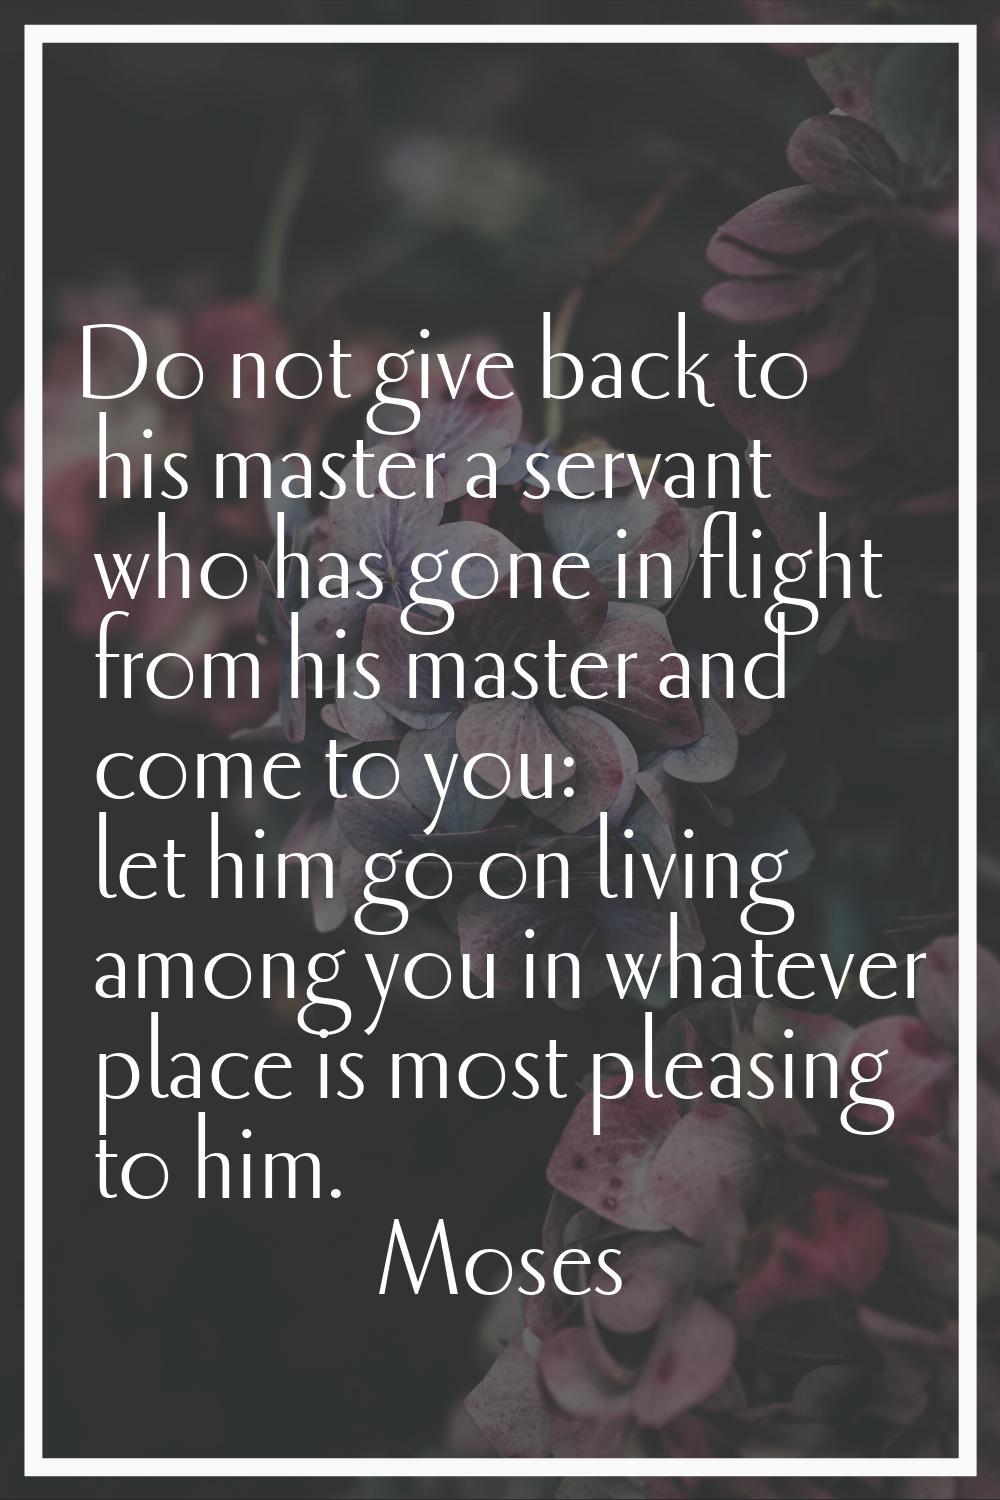 Do not give back to his master a servant who has gone in flight from his master and come to you: le